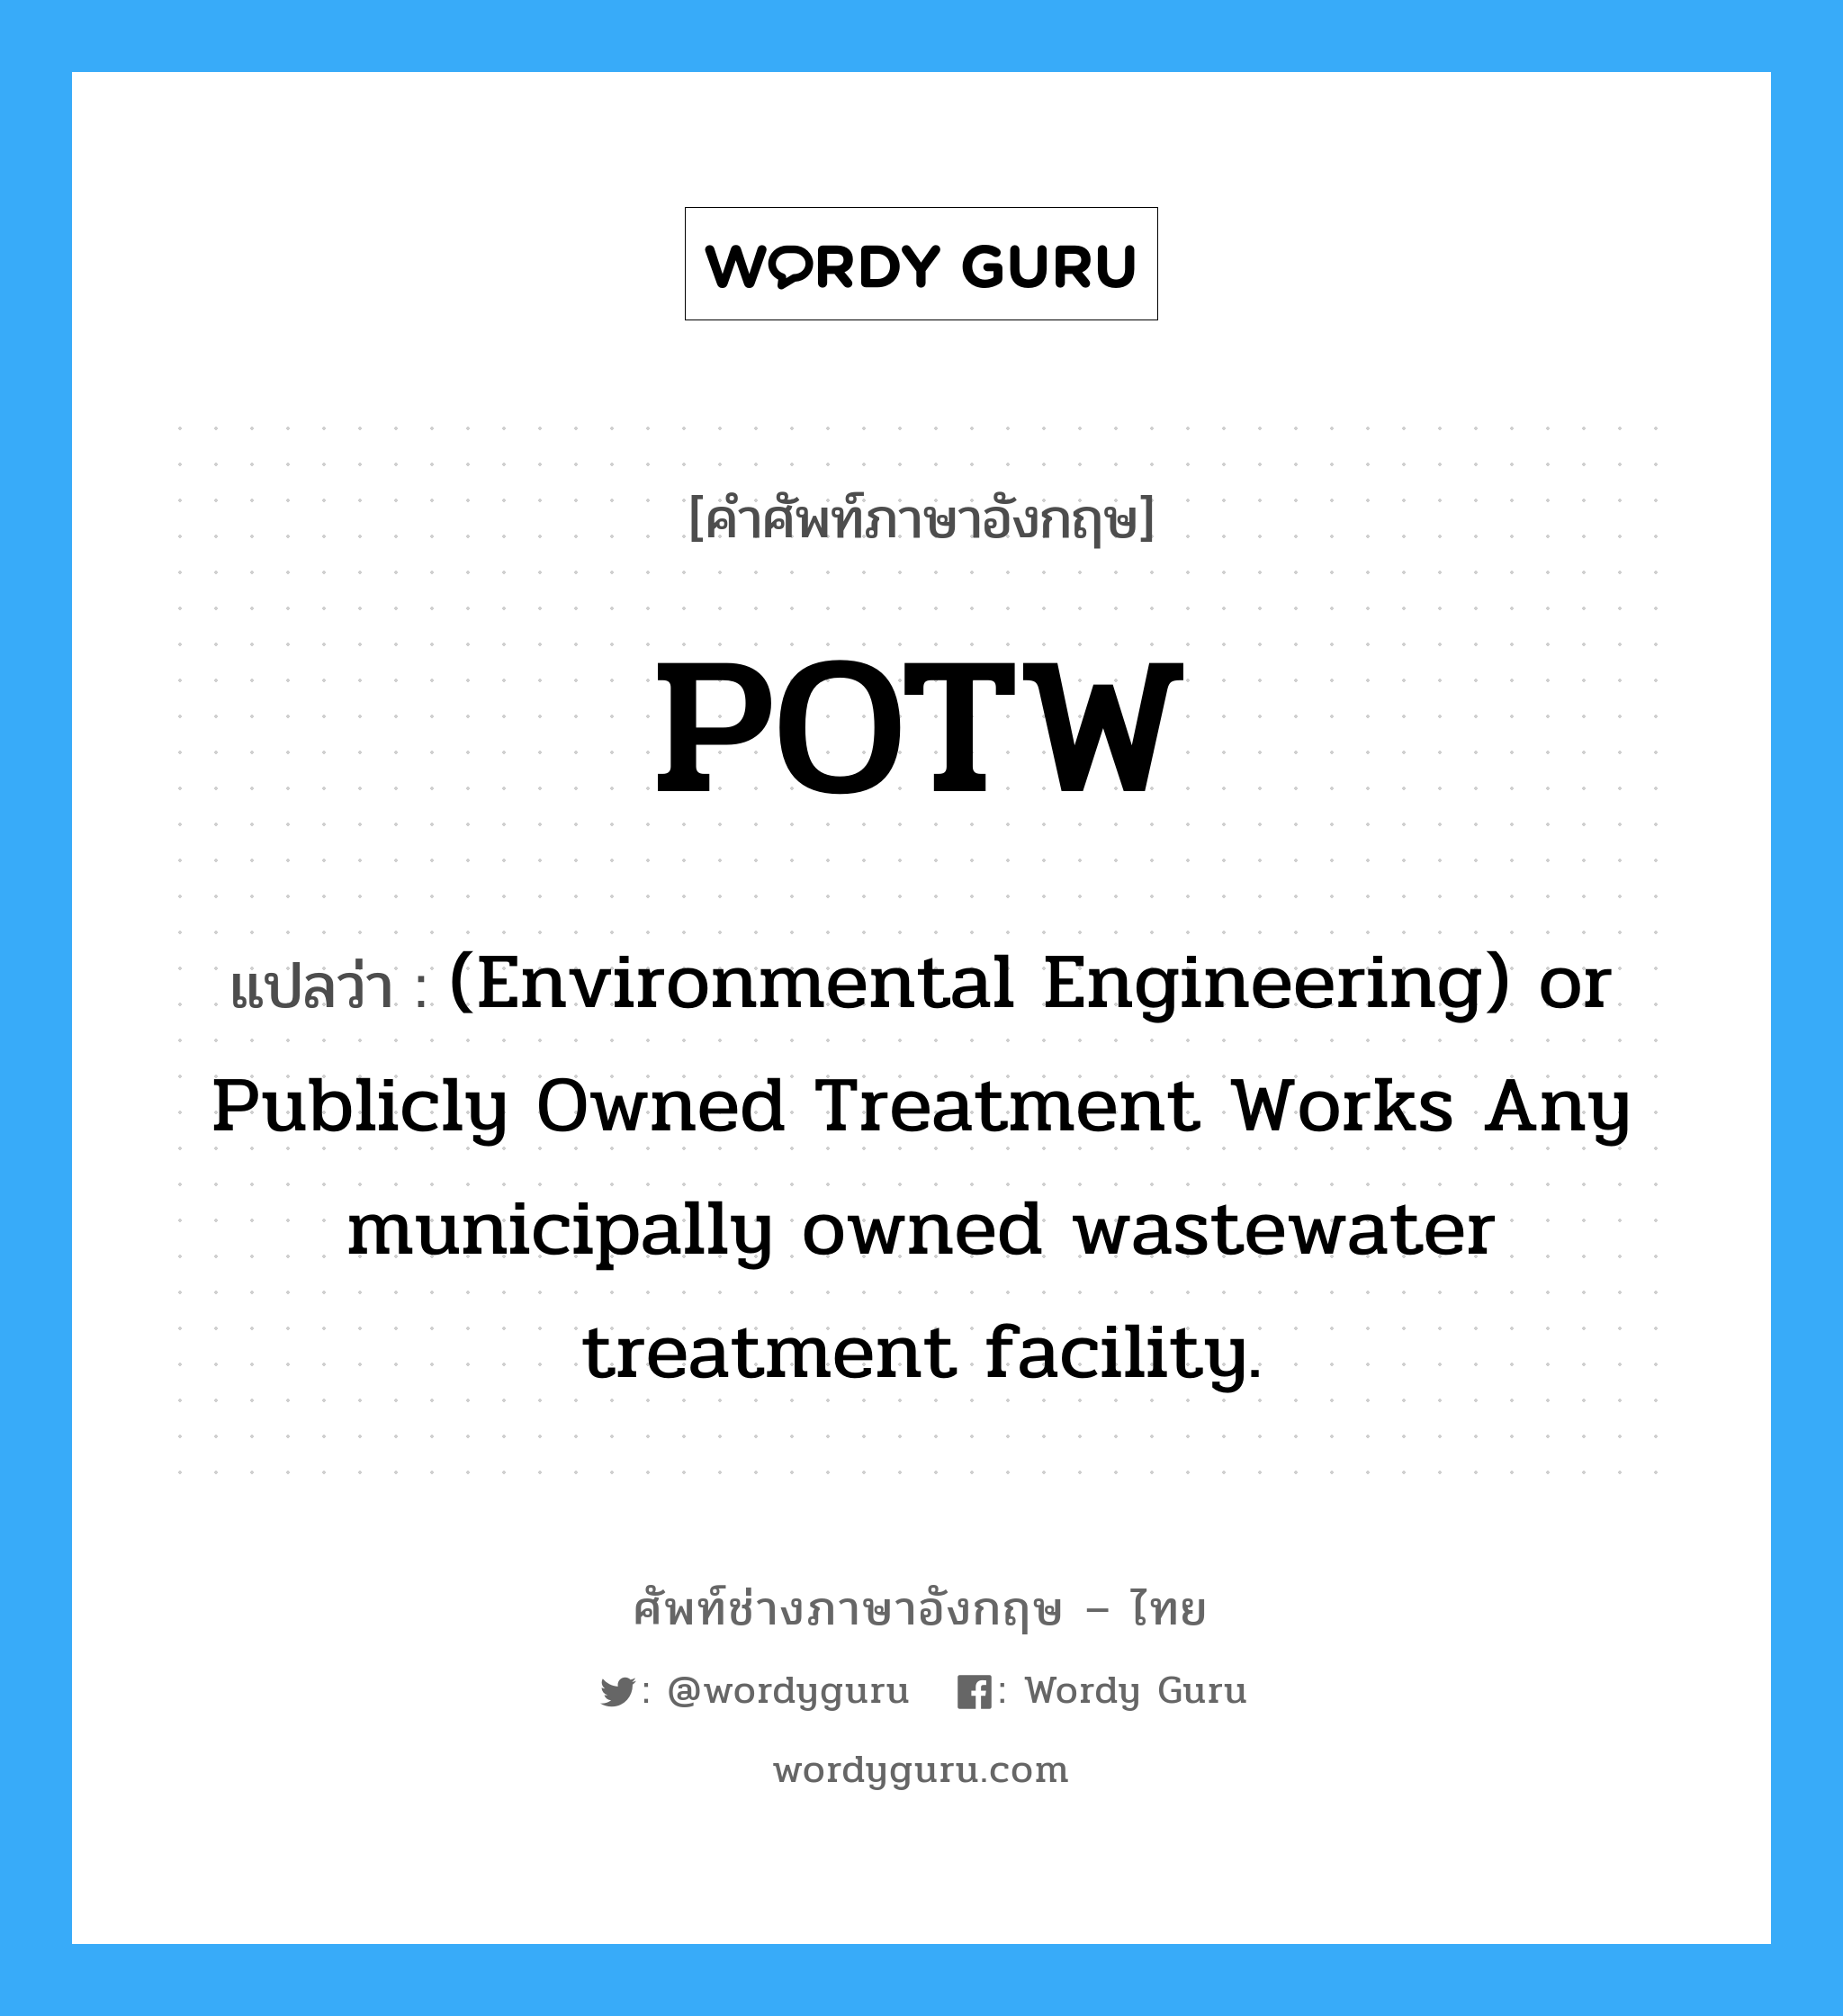 POTW แปลว่า?, คำศัพท์ช่างภาษาอังกฤษ - ไทย POTW คำศัพท์ภาษาอังกฤษ POTW แปลว่า (Environmental Engineering) or Publicly Owned Treatment Works Any municipally owned wastewater treatment facility.